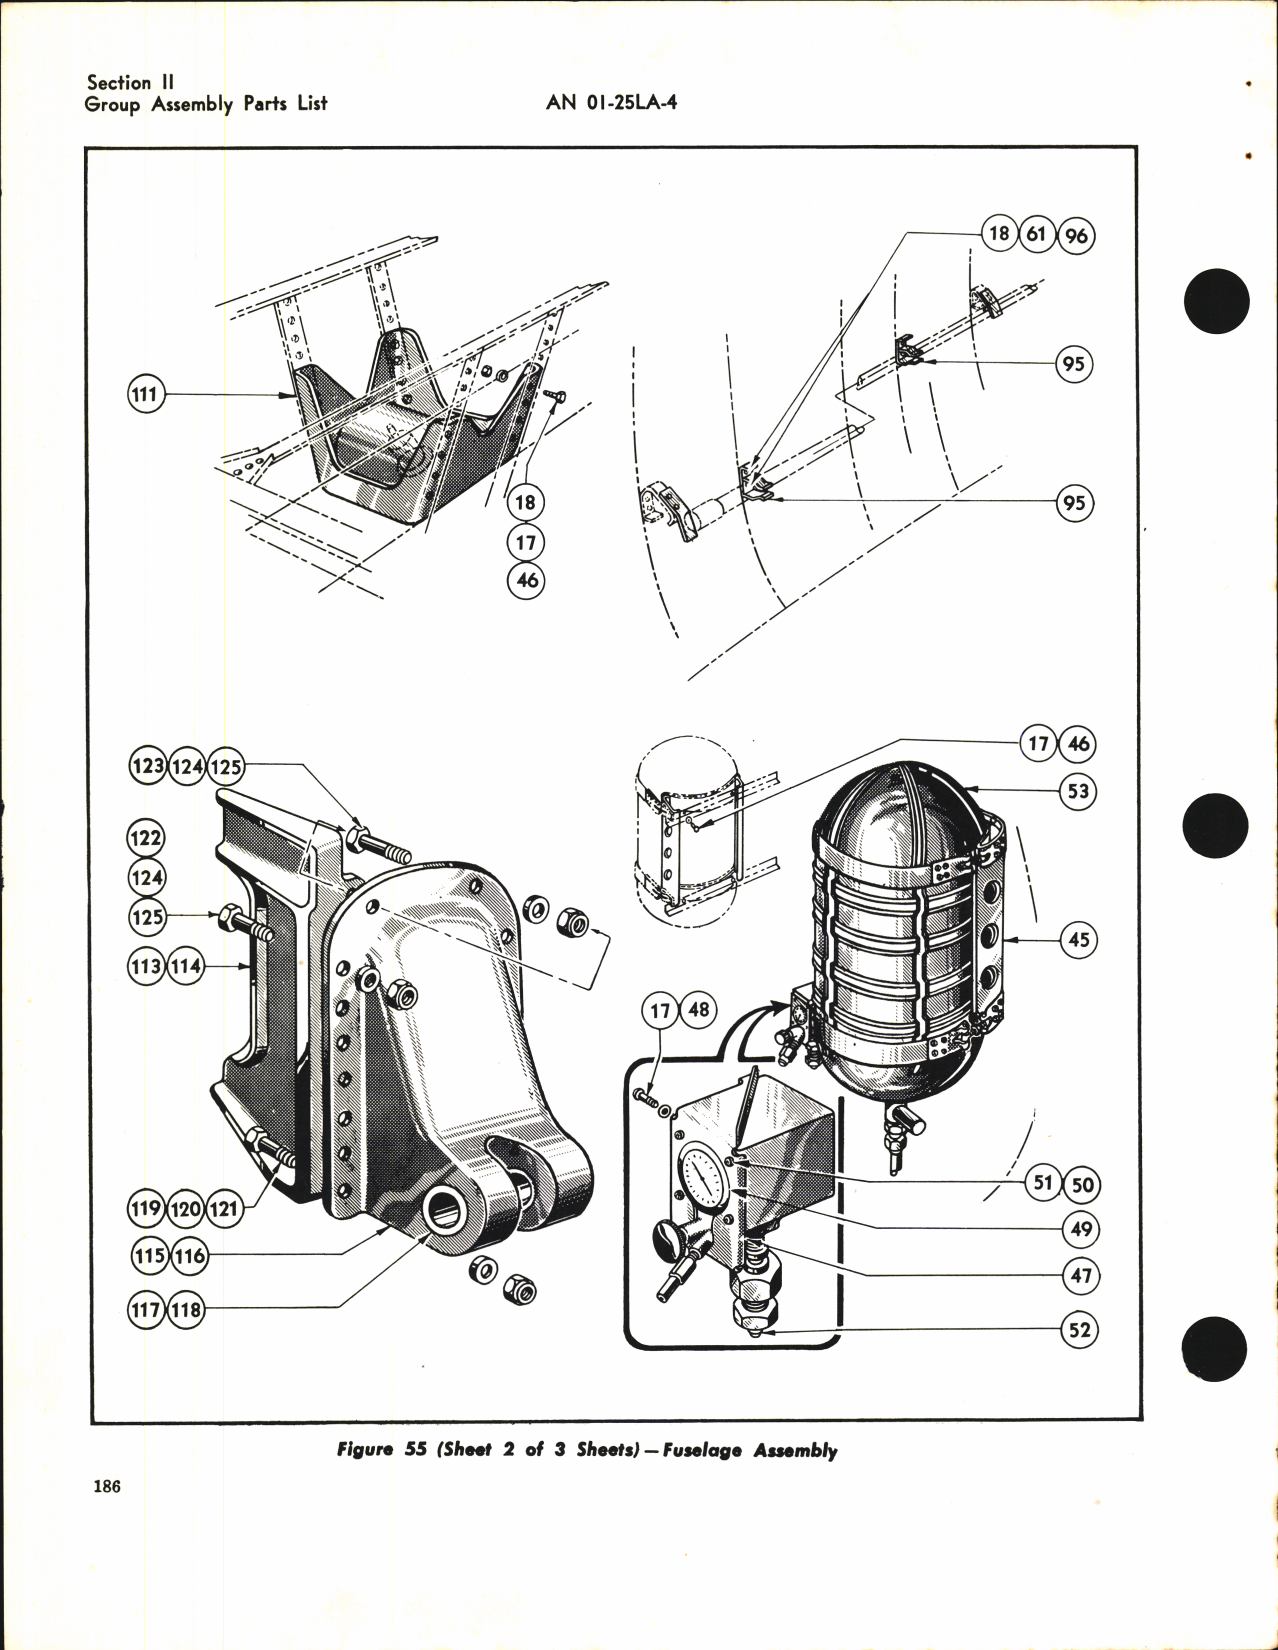 Sample page 6 from AirCorps Library document: Parts Catalog for C-46A, C-46D, and R5C-1